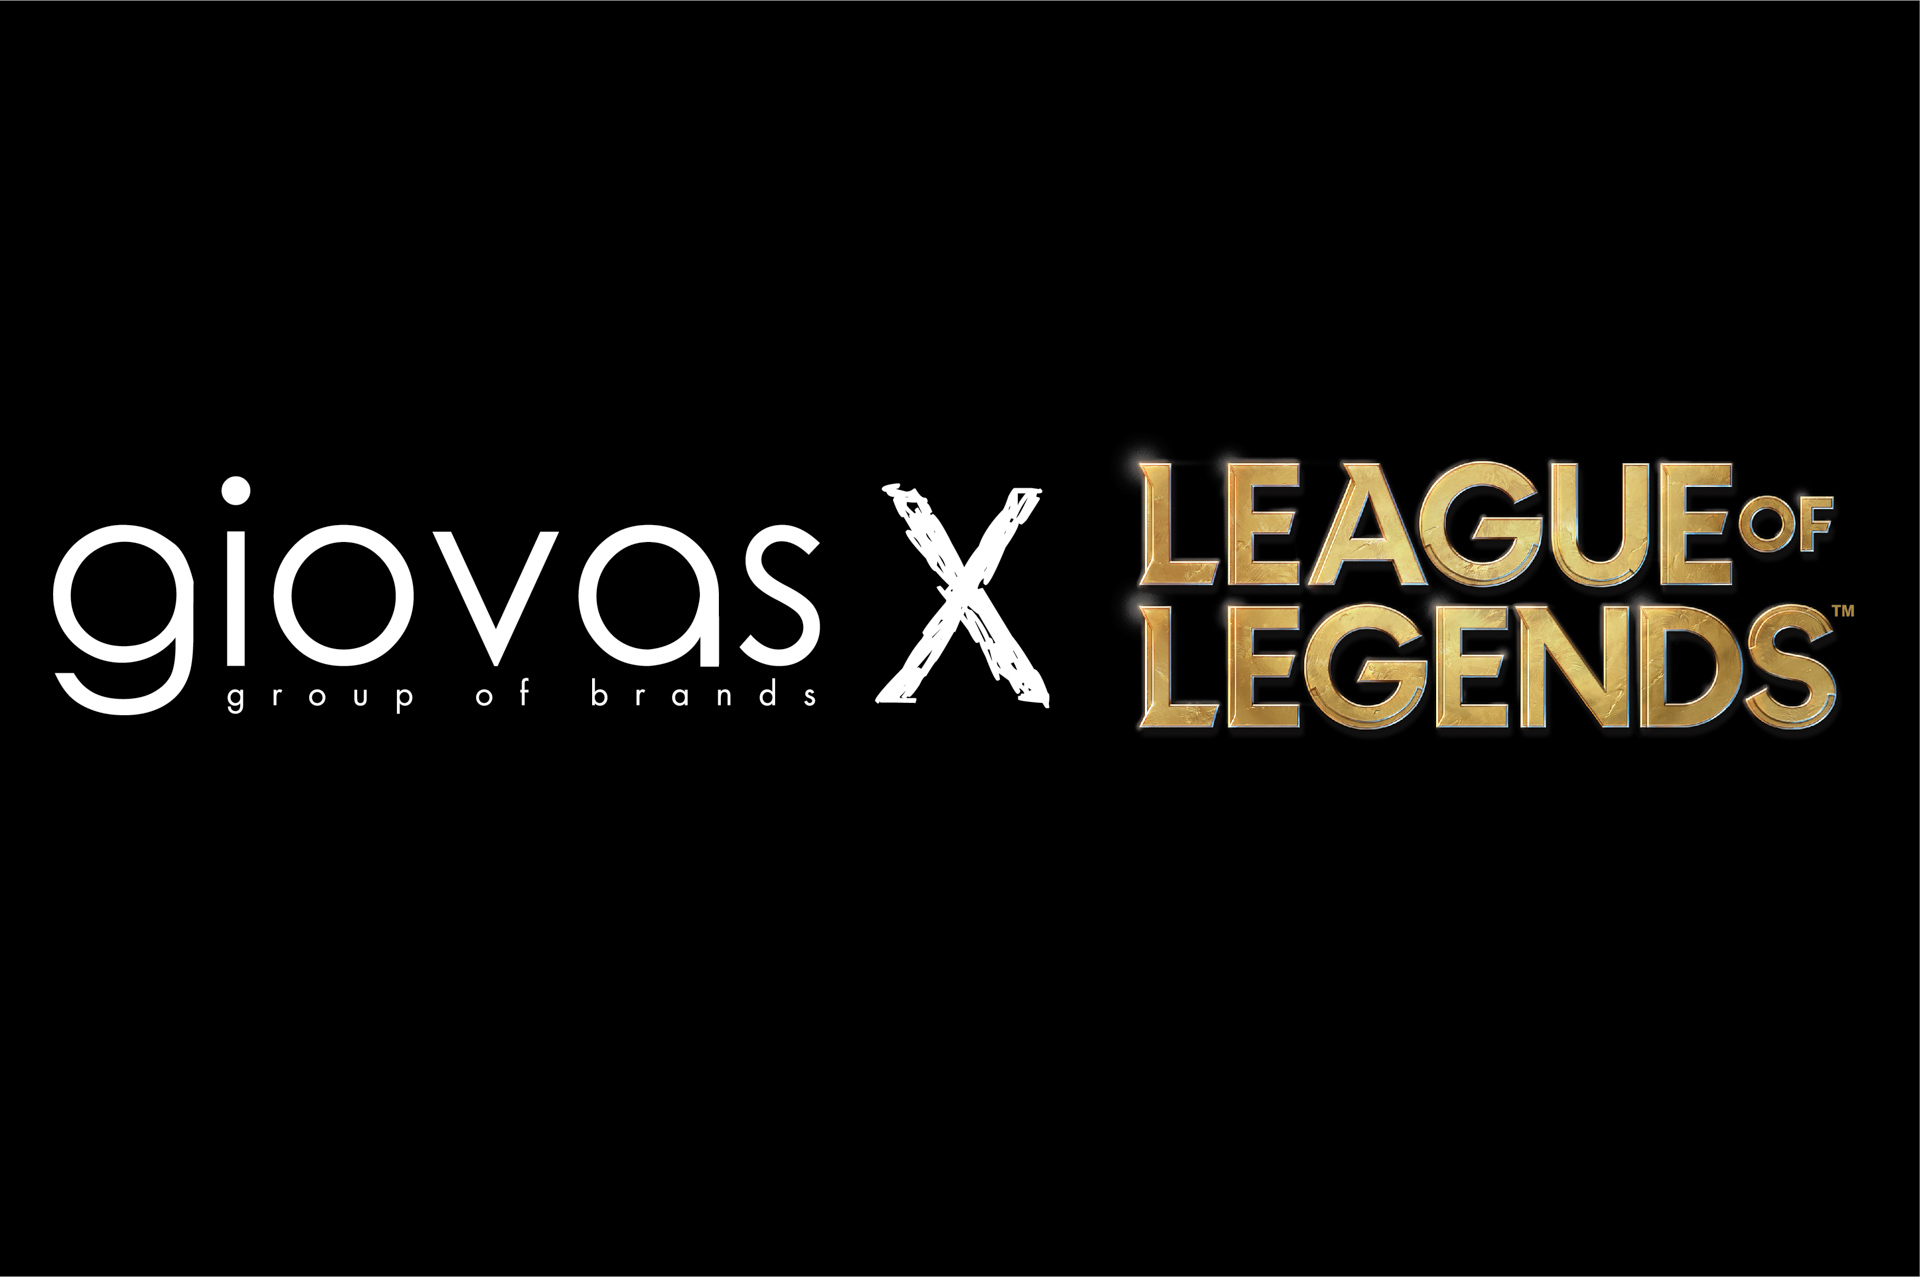 Significant collaboration between Giovas S.A. & the “Legendary” Riot Games  - Giovas Group